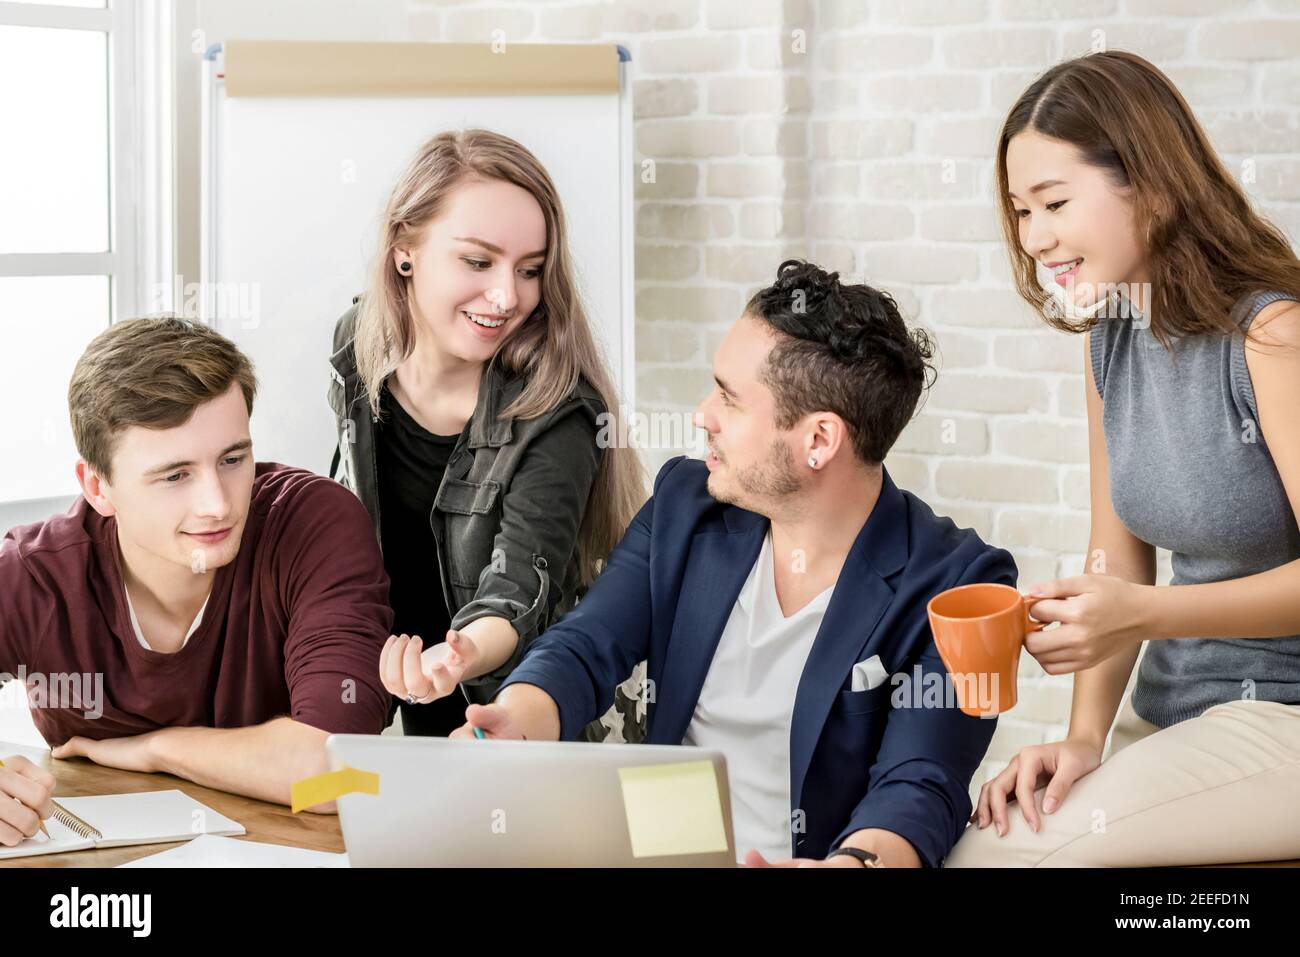 Multiethnic college students discussing group work together - education concept Stock Photo